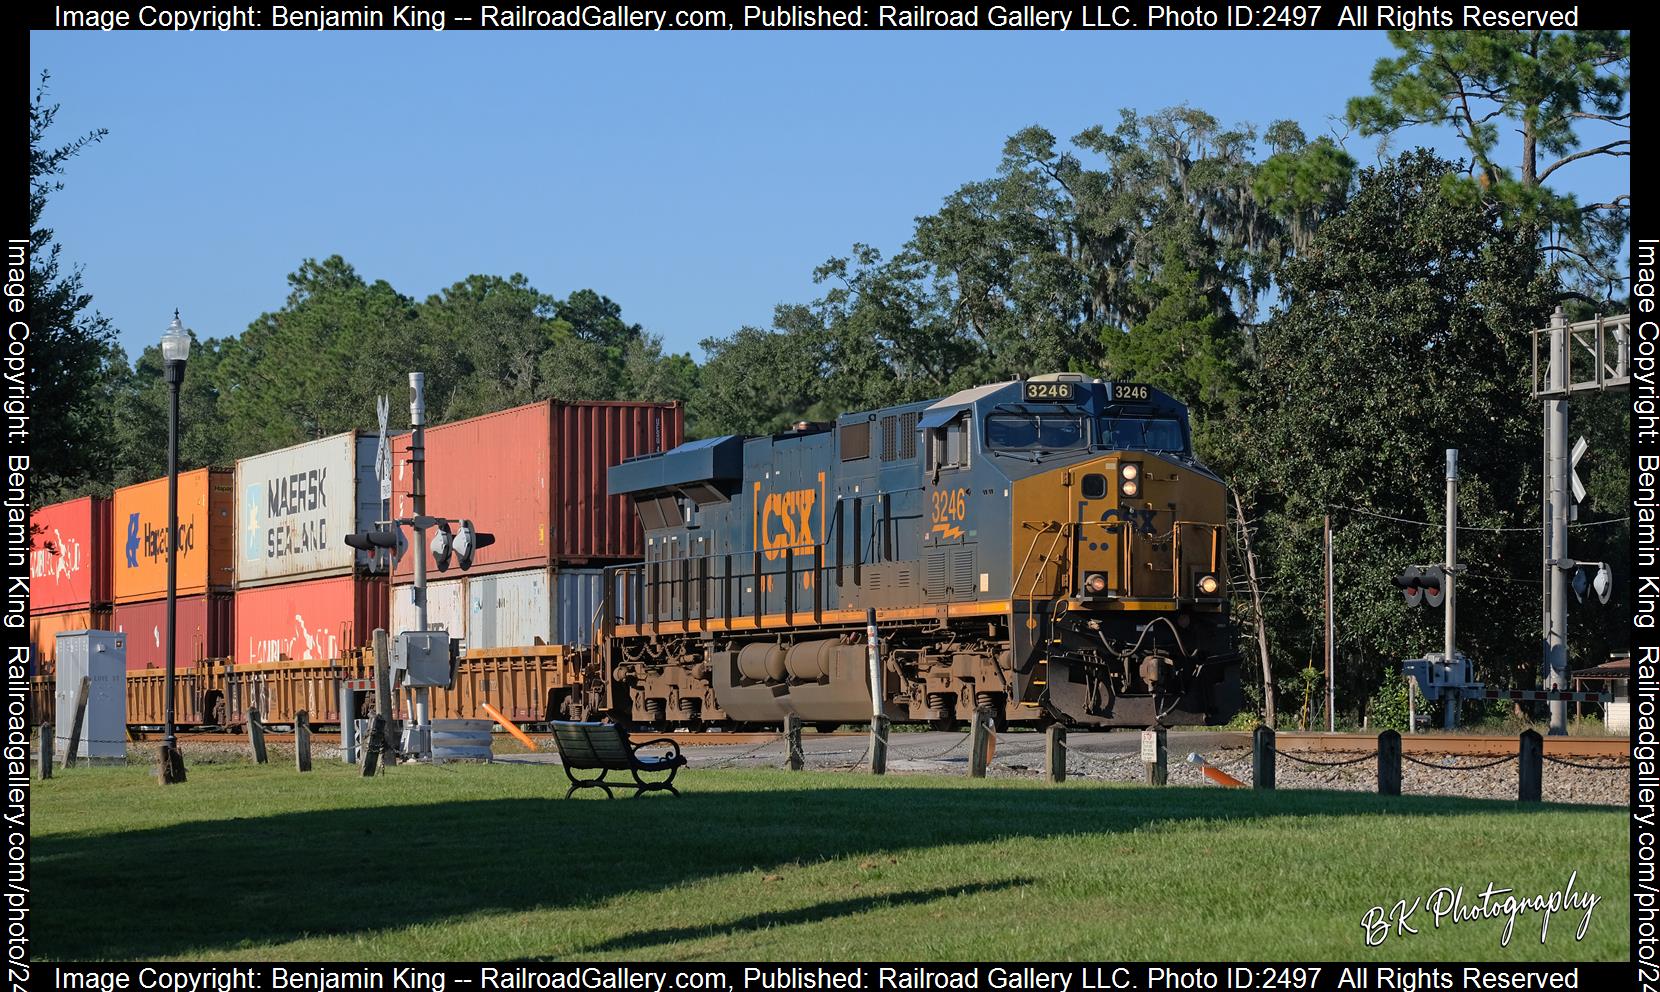 CSXT 3246 is a class GE ES44AH and  is pictured in Folkston, Georgia, USA.  This was taken along the CSXT Nahunta Subdivision on the CSX Transportation. Photo Copyright: Benjamin King uploaded to Railroad Gallery on 11/26/2023. This photograph of CSXT 3246 was taken on Sunday, September 26, 2021. All Rights Reserved. 